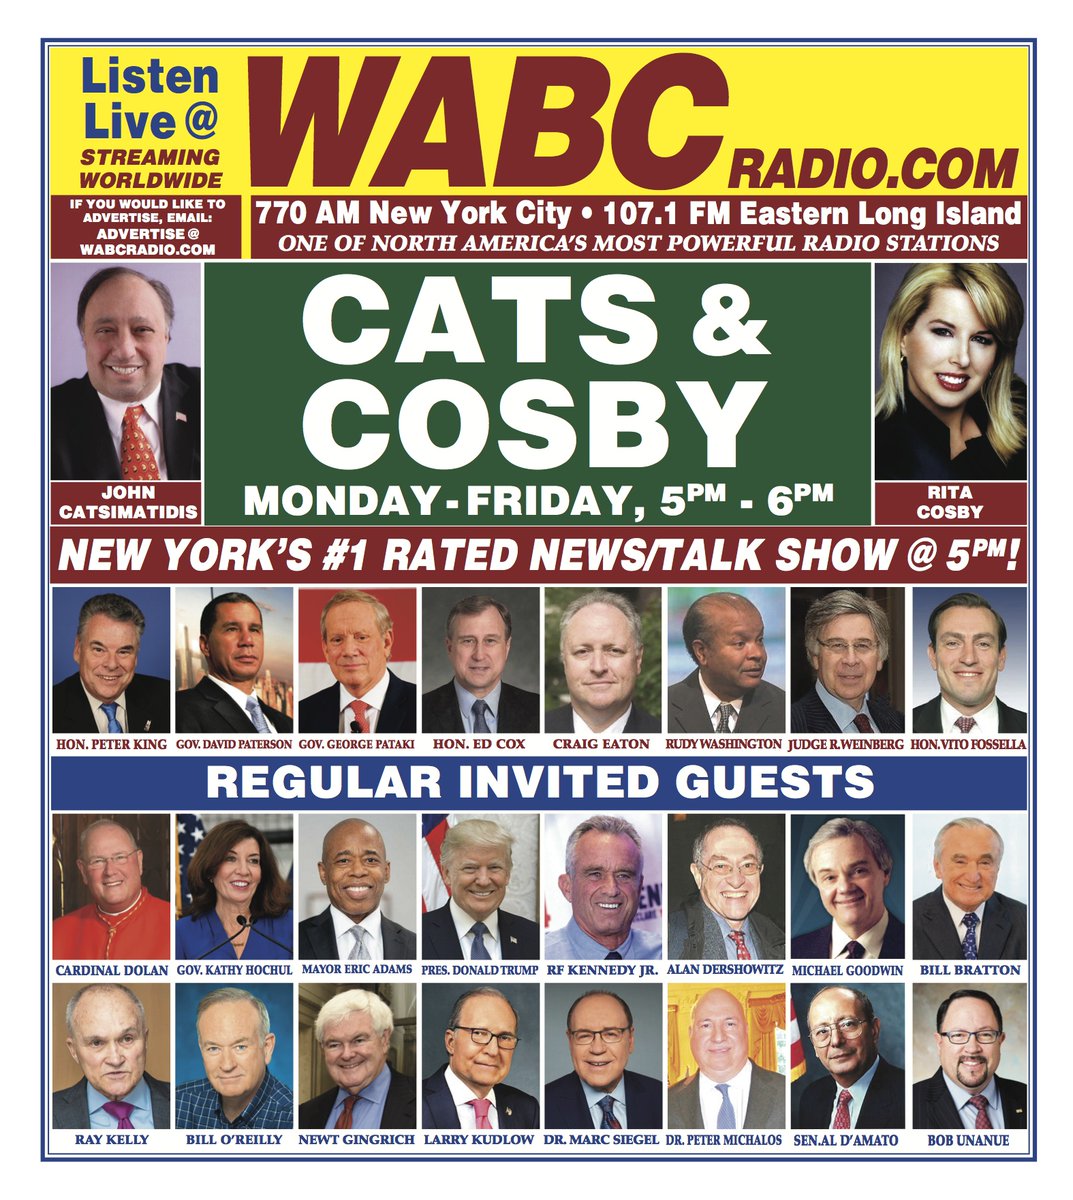 New York's #1 Rated News/Talk Show at 5PM EST! @Catsandcosby with your hosts @JCats2013 and @RitaCosby! Informative and entertaining interviews with notable special guests! Listen on wabcradio.com or on the 77 WABC app!